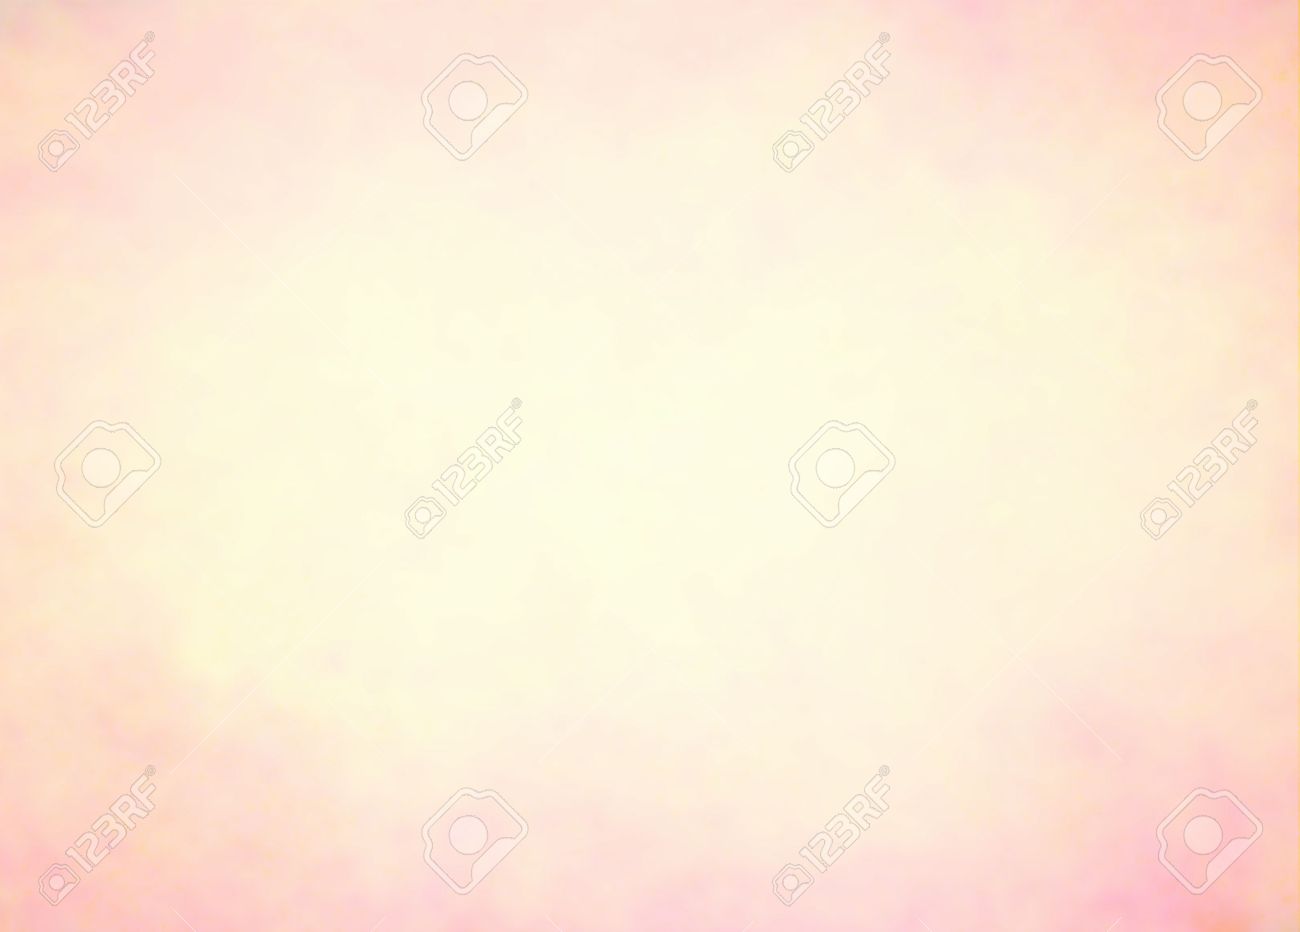 Pale Beige Or Off White Background With Pink Grunge Border Texture